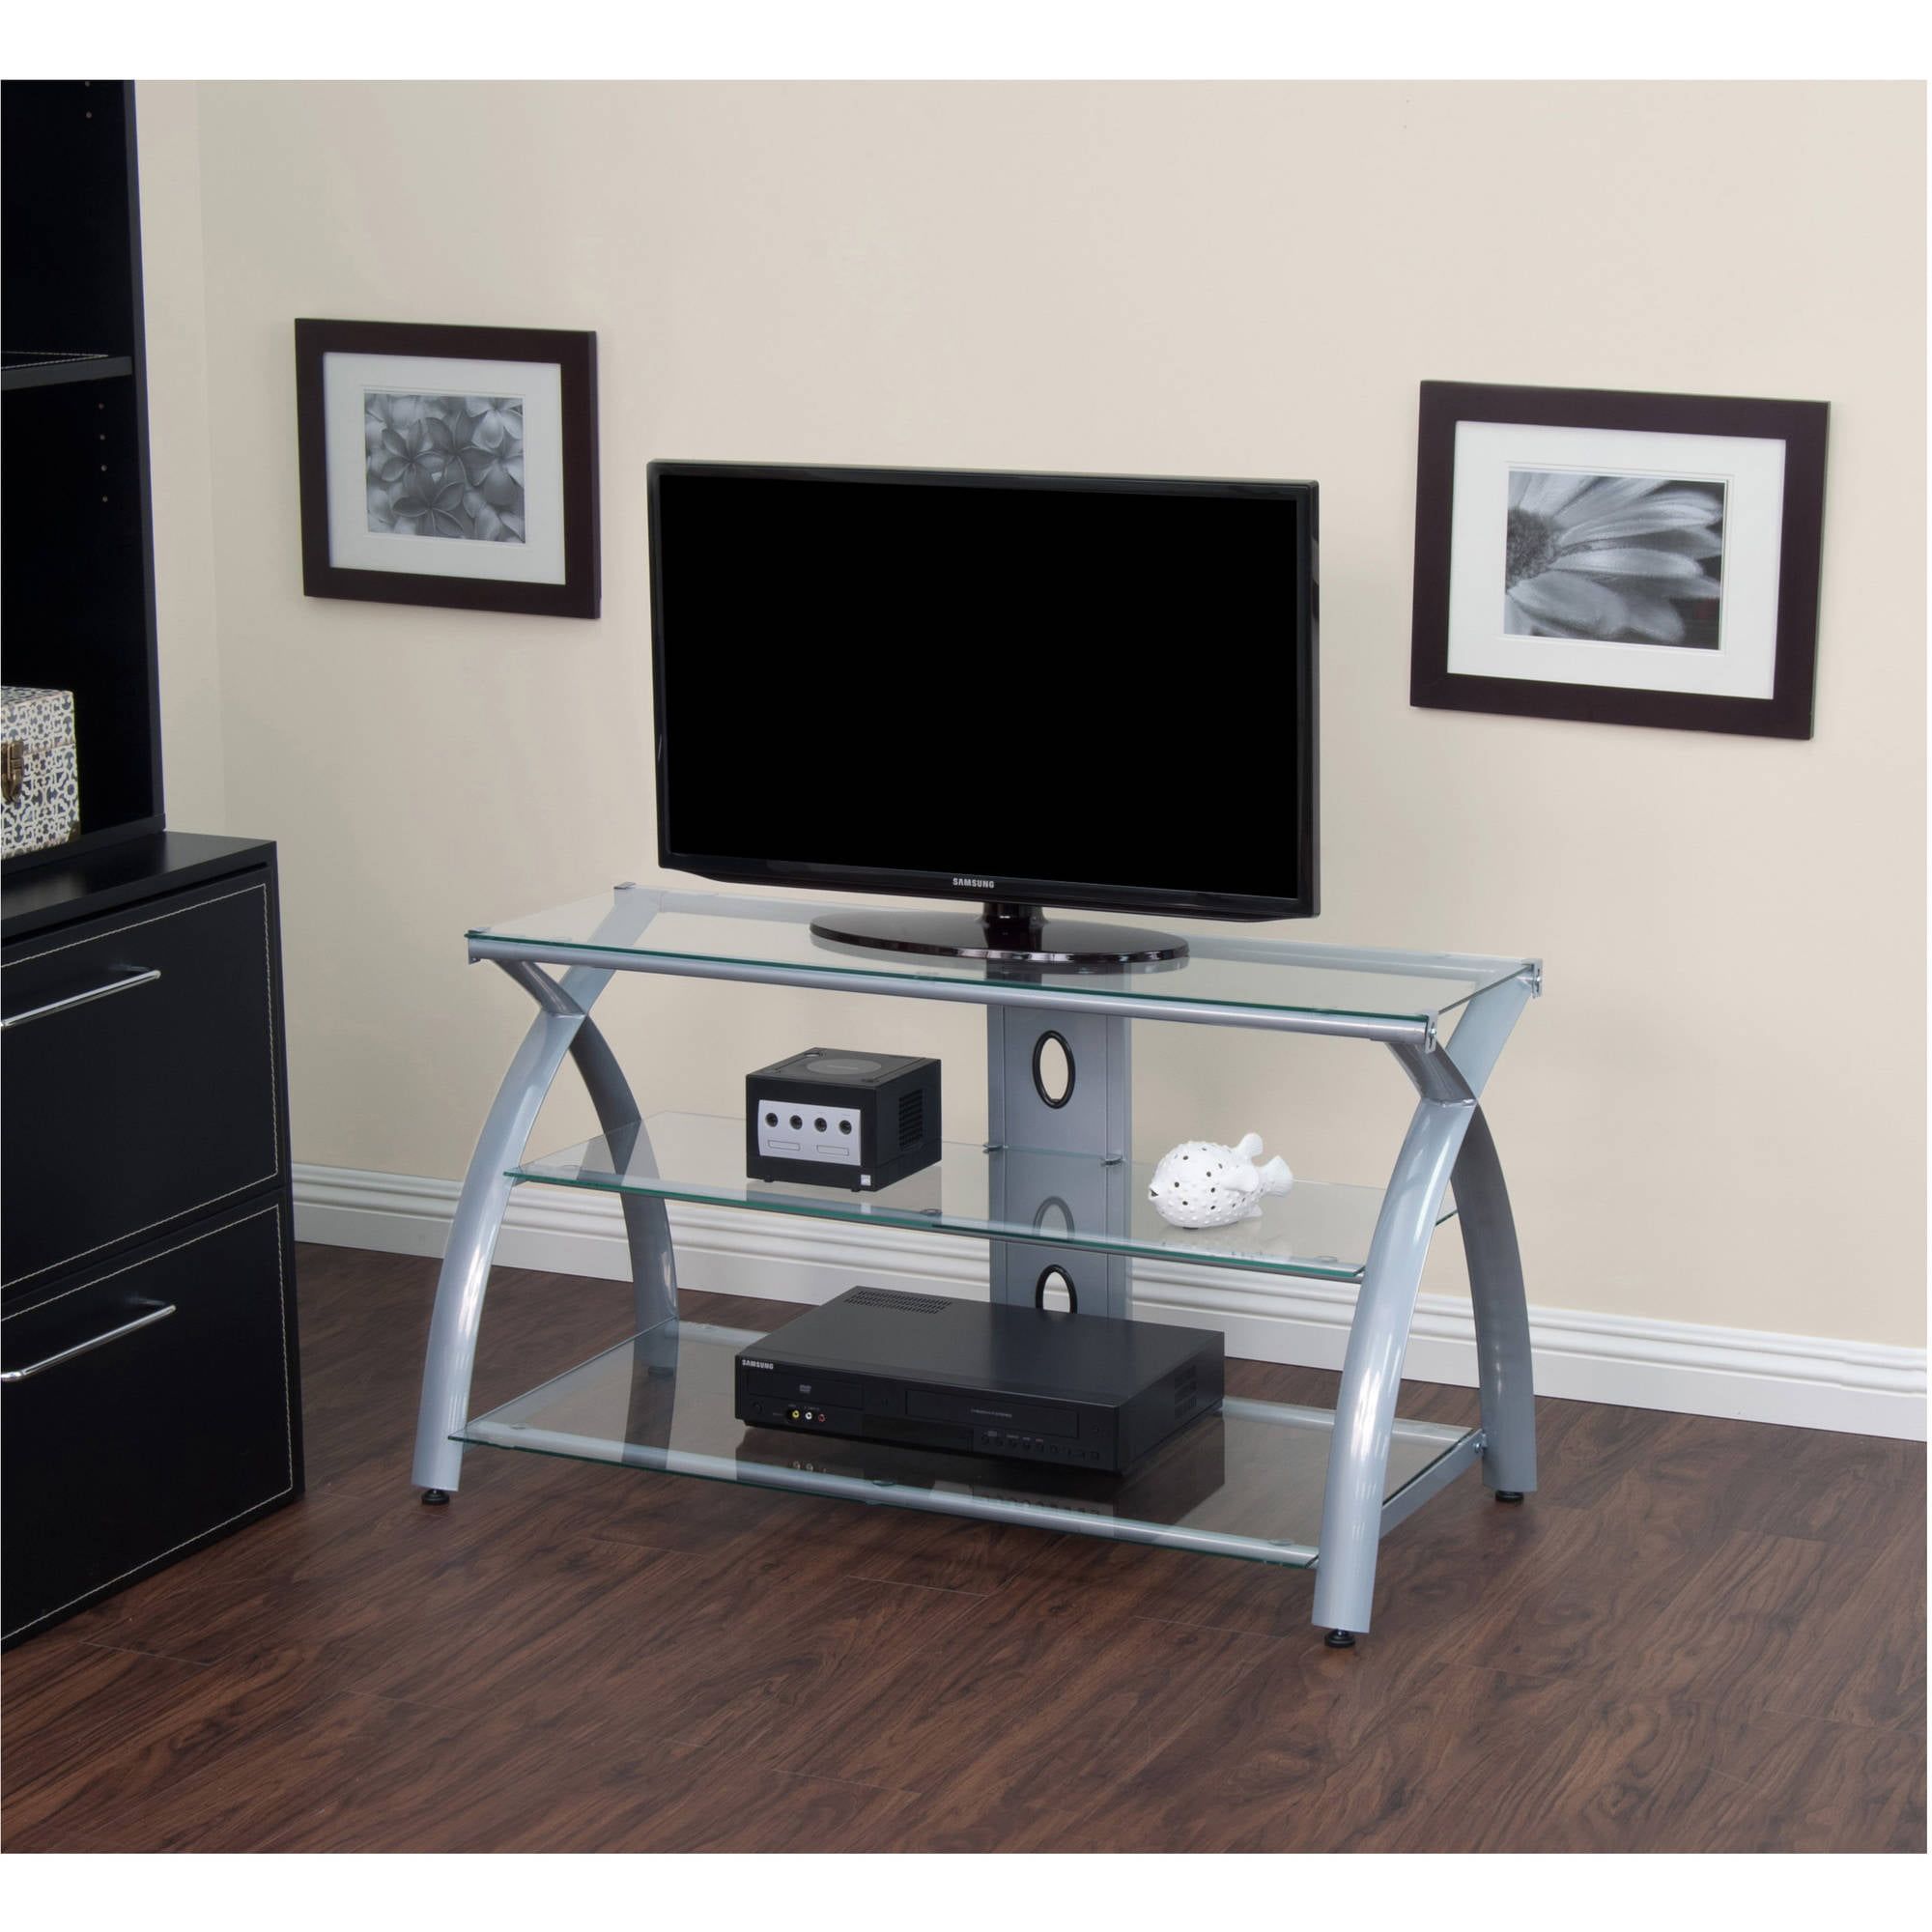 Calico Designs Futura 42" Wide 3 Shelf Tv Stand In Silver / Clear Glass Inside Glass Shelves Tv Stands (View 9 of 20)